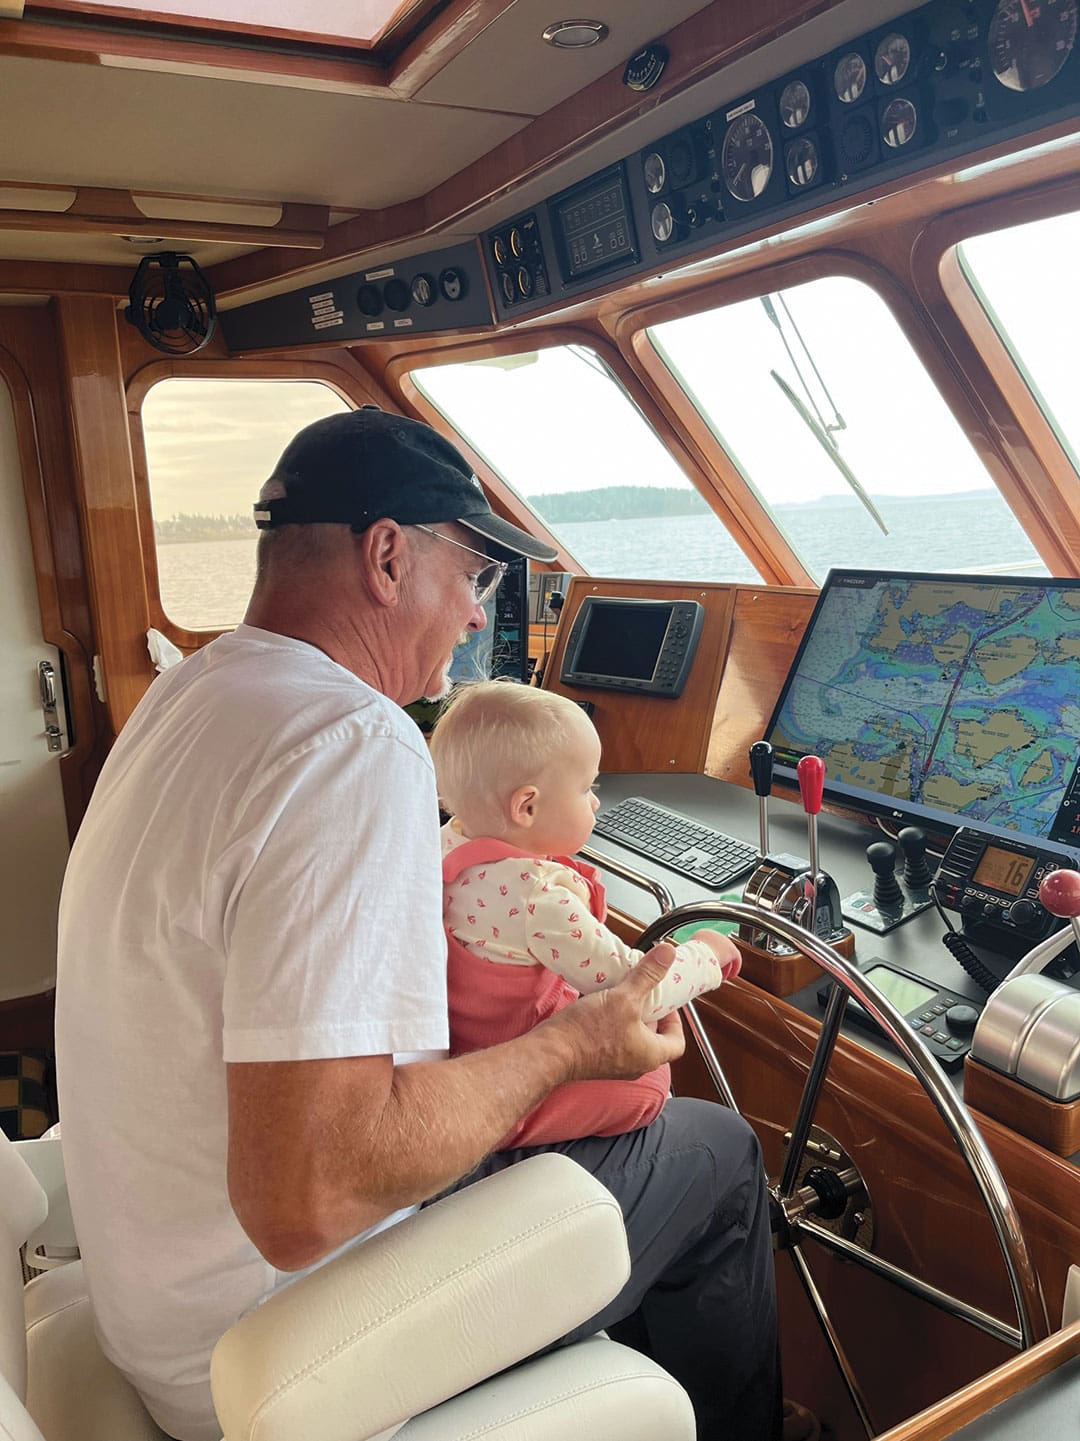 Dan Streech with grandchildren Isaac and Lilly in the pilothouse while underway.